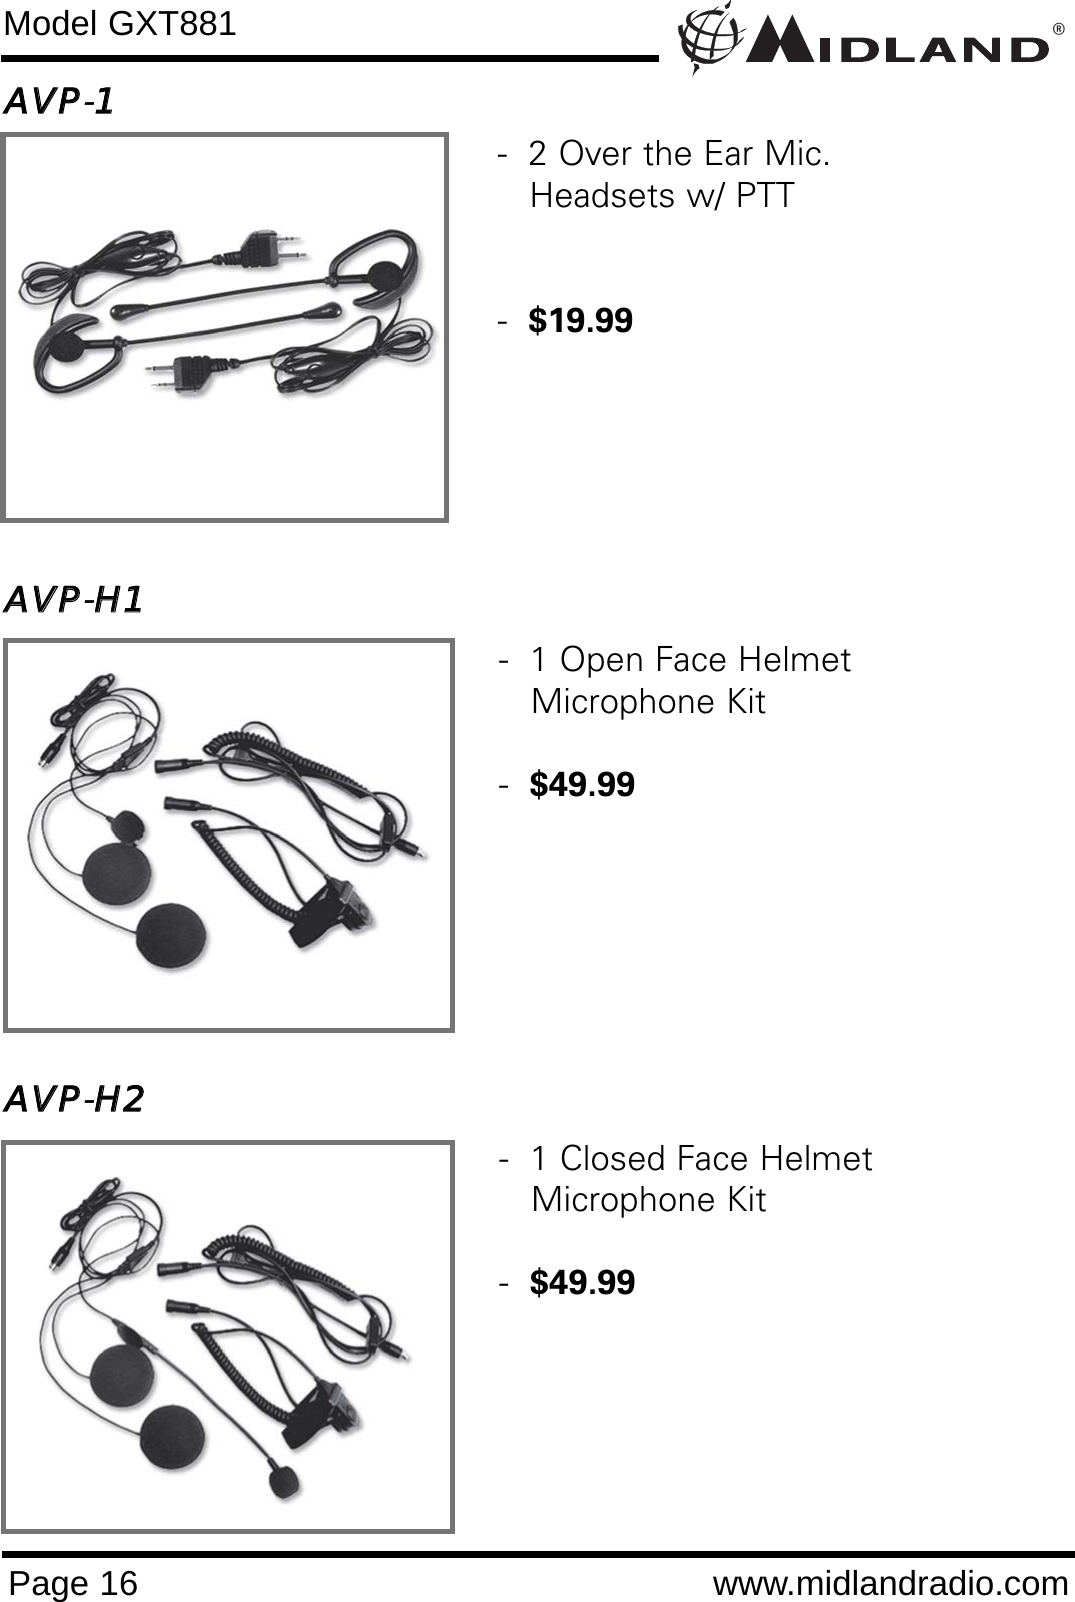 AAVVPP-11AAVVPP-HH11AAVVPP-HH22®Page 16 www.midlandradio.comModel GXT881-  1 Open Face Helmet Microphone Kit-  $49.99-  1 Closed Face HelmetMicrophone Kit-  $49.99-  2 Over the Ear Mic. Headsets w/ PTT-  $19.99